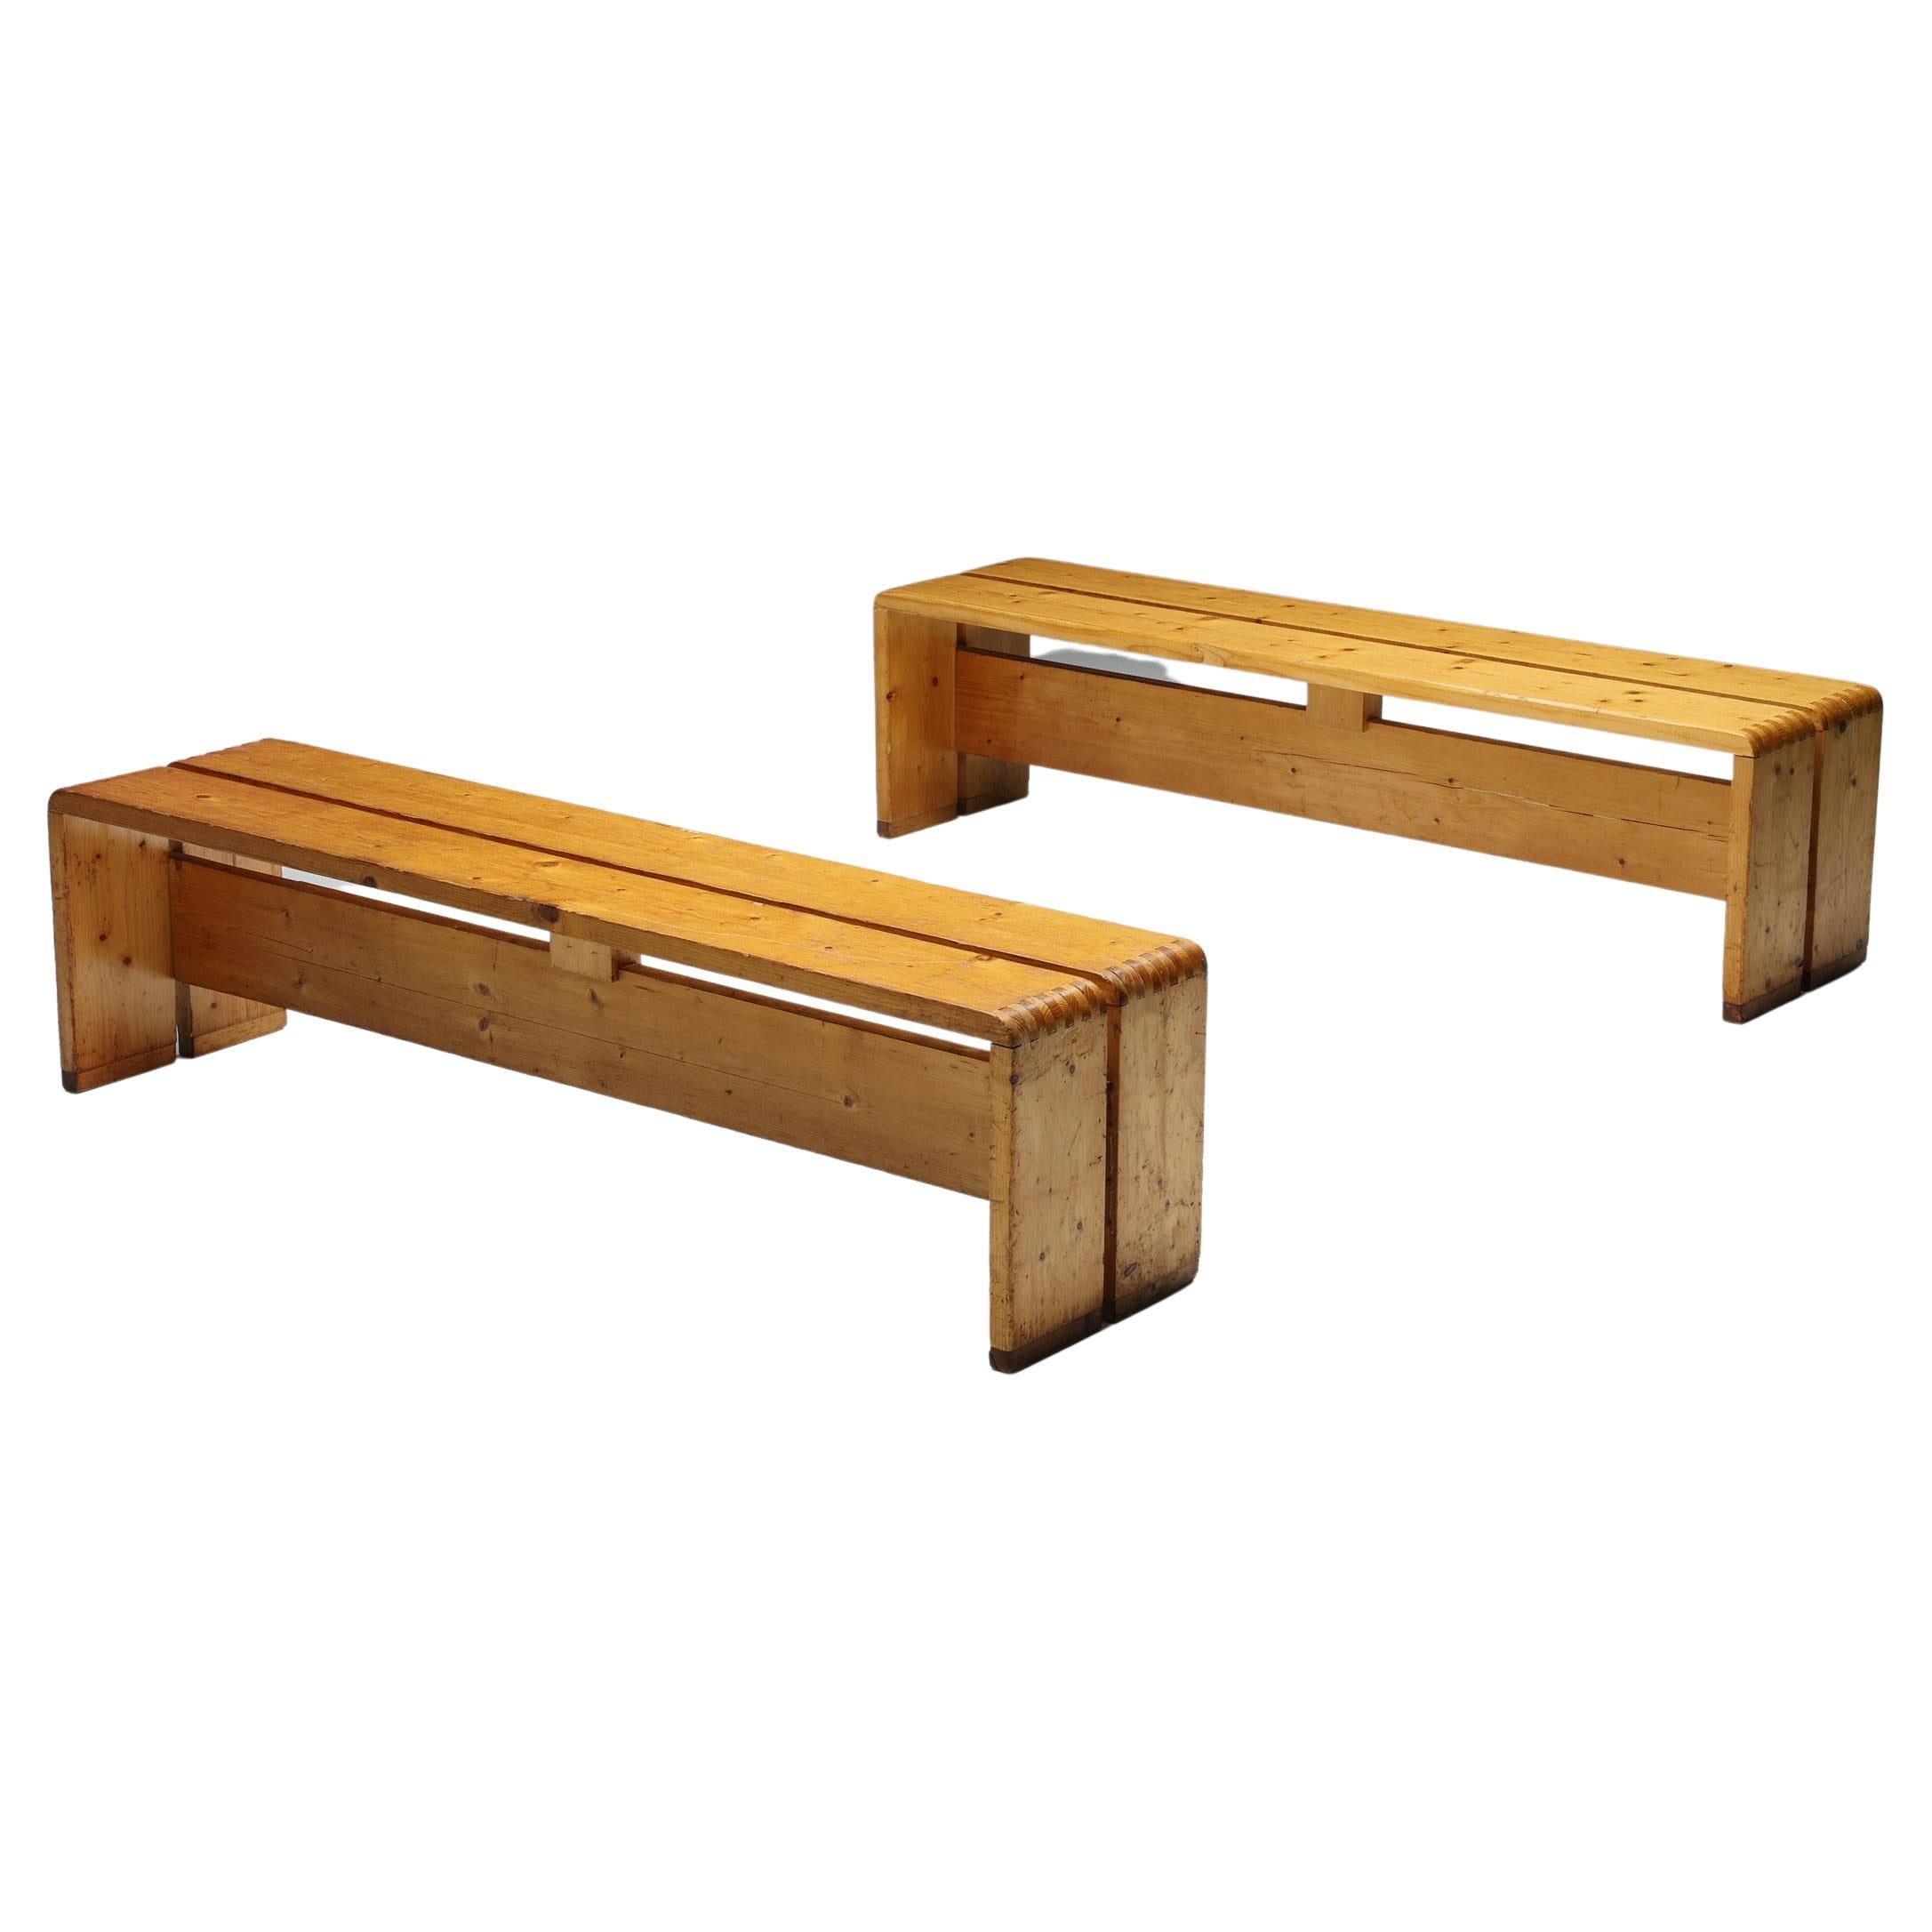 Charlotte Perriand Les Arcs Two-Person Bench, Mid-Century Modern, 1960's